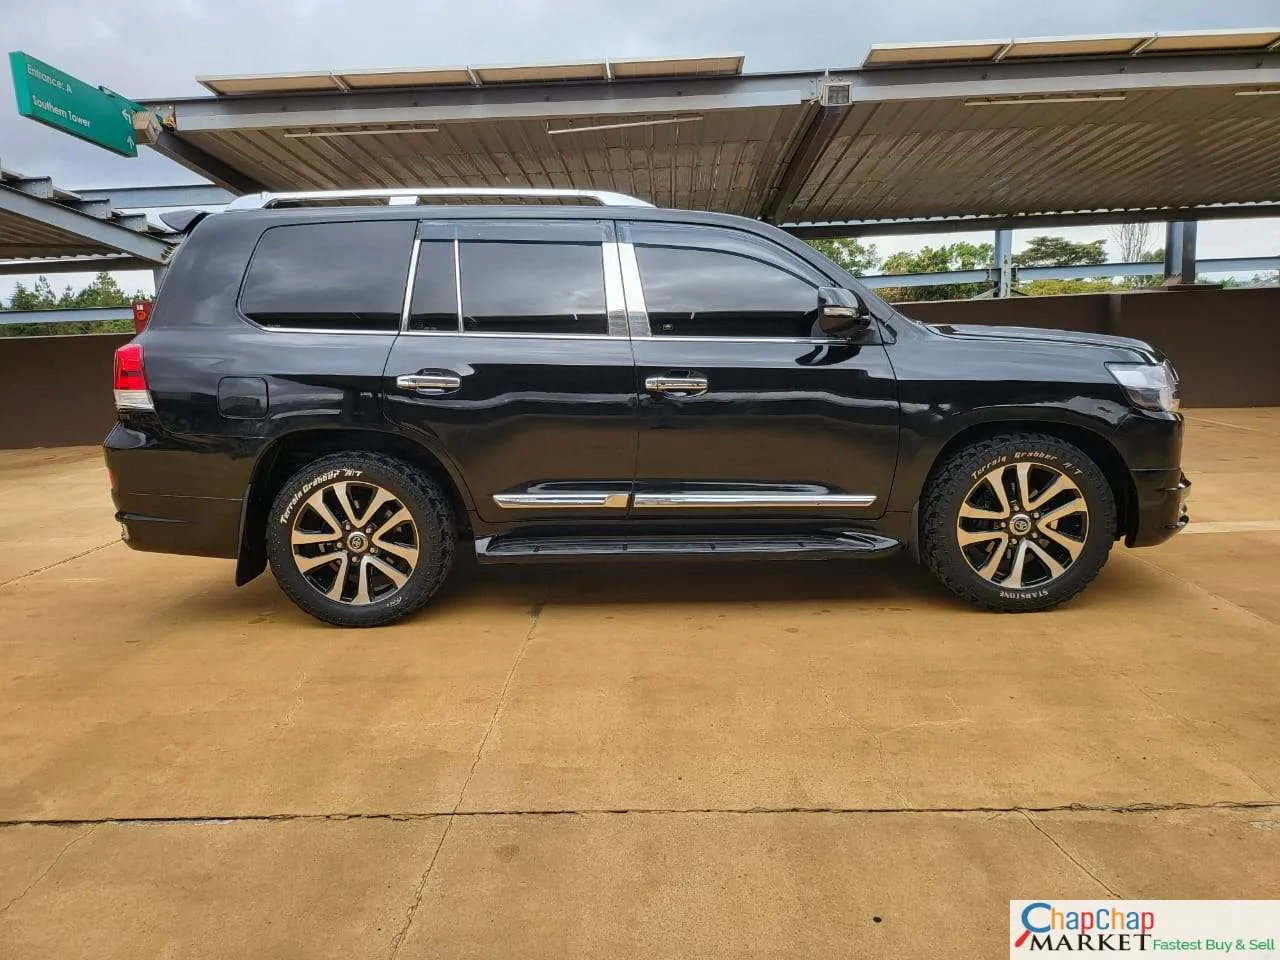 Toyota Land Cruiser V8 ZX 200 SERIES QUICK SALE You Pay 30% Deposit Trade in Ok zx v8 for sale in kenya hire purchase installments